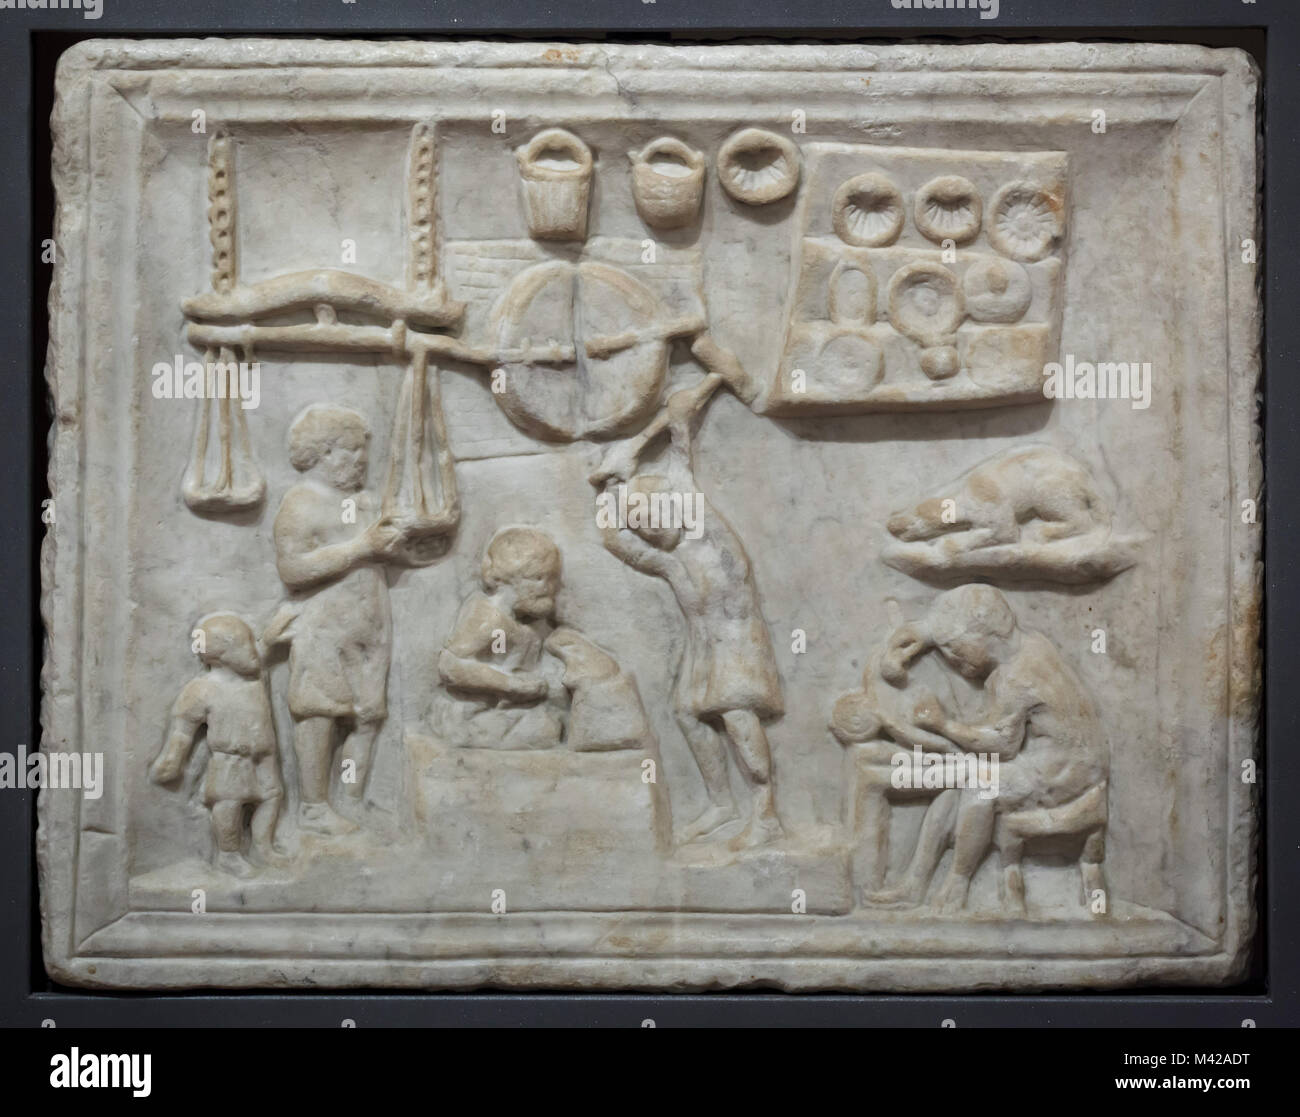 Blacksmith workshop depicted in the Roman marble relief from the 1st century AD from Pompeii from the Borgia Collection on display in the National Archaeological Museum in Naples, Campania, Italy. Stock Photo